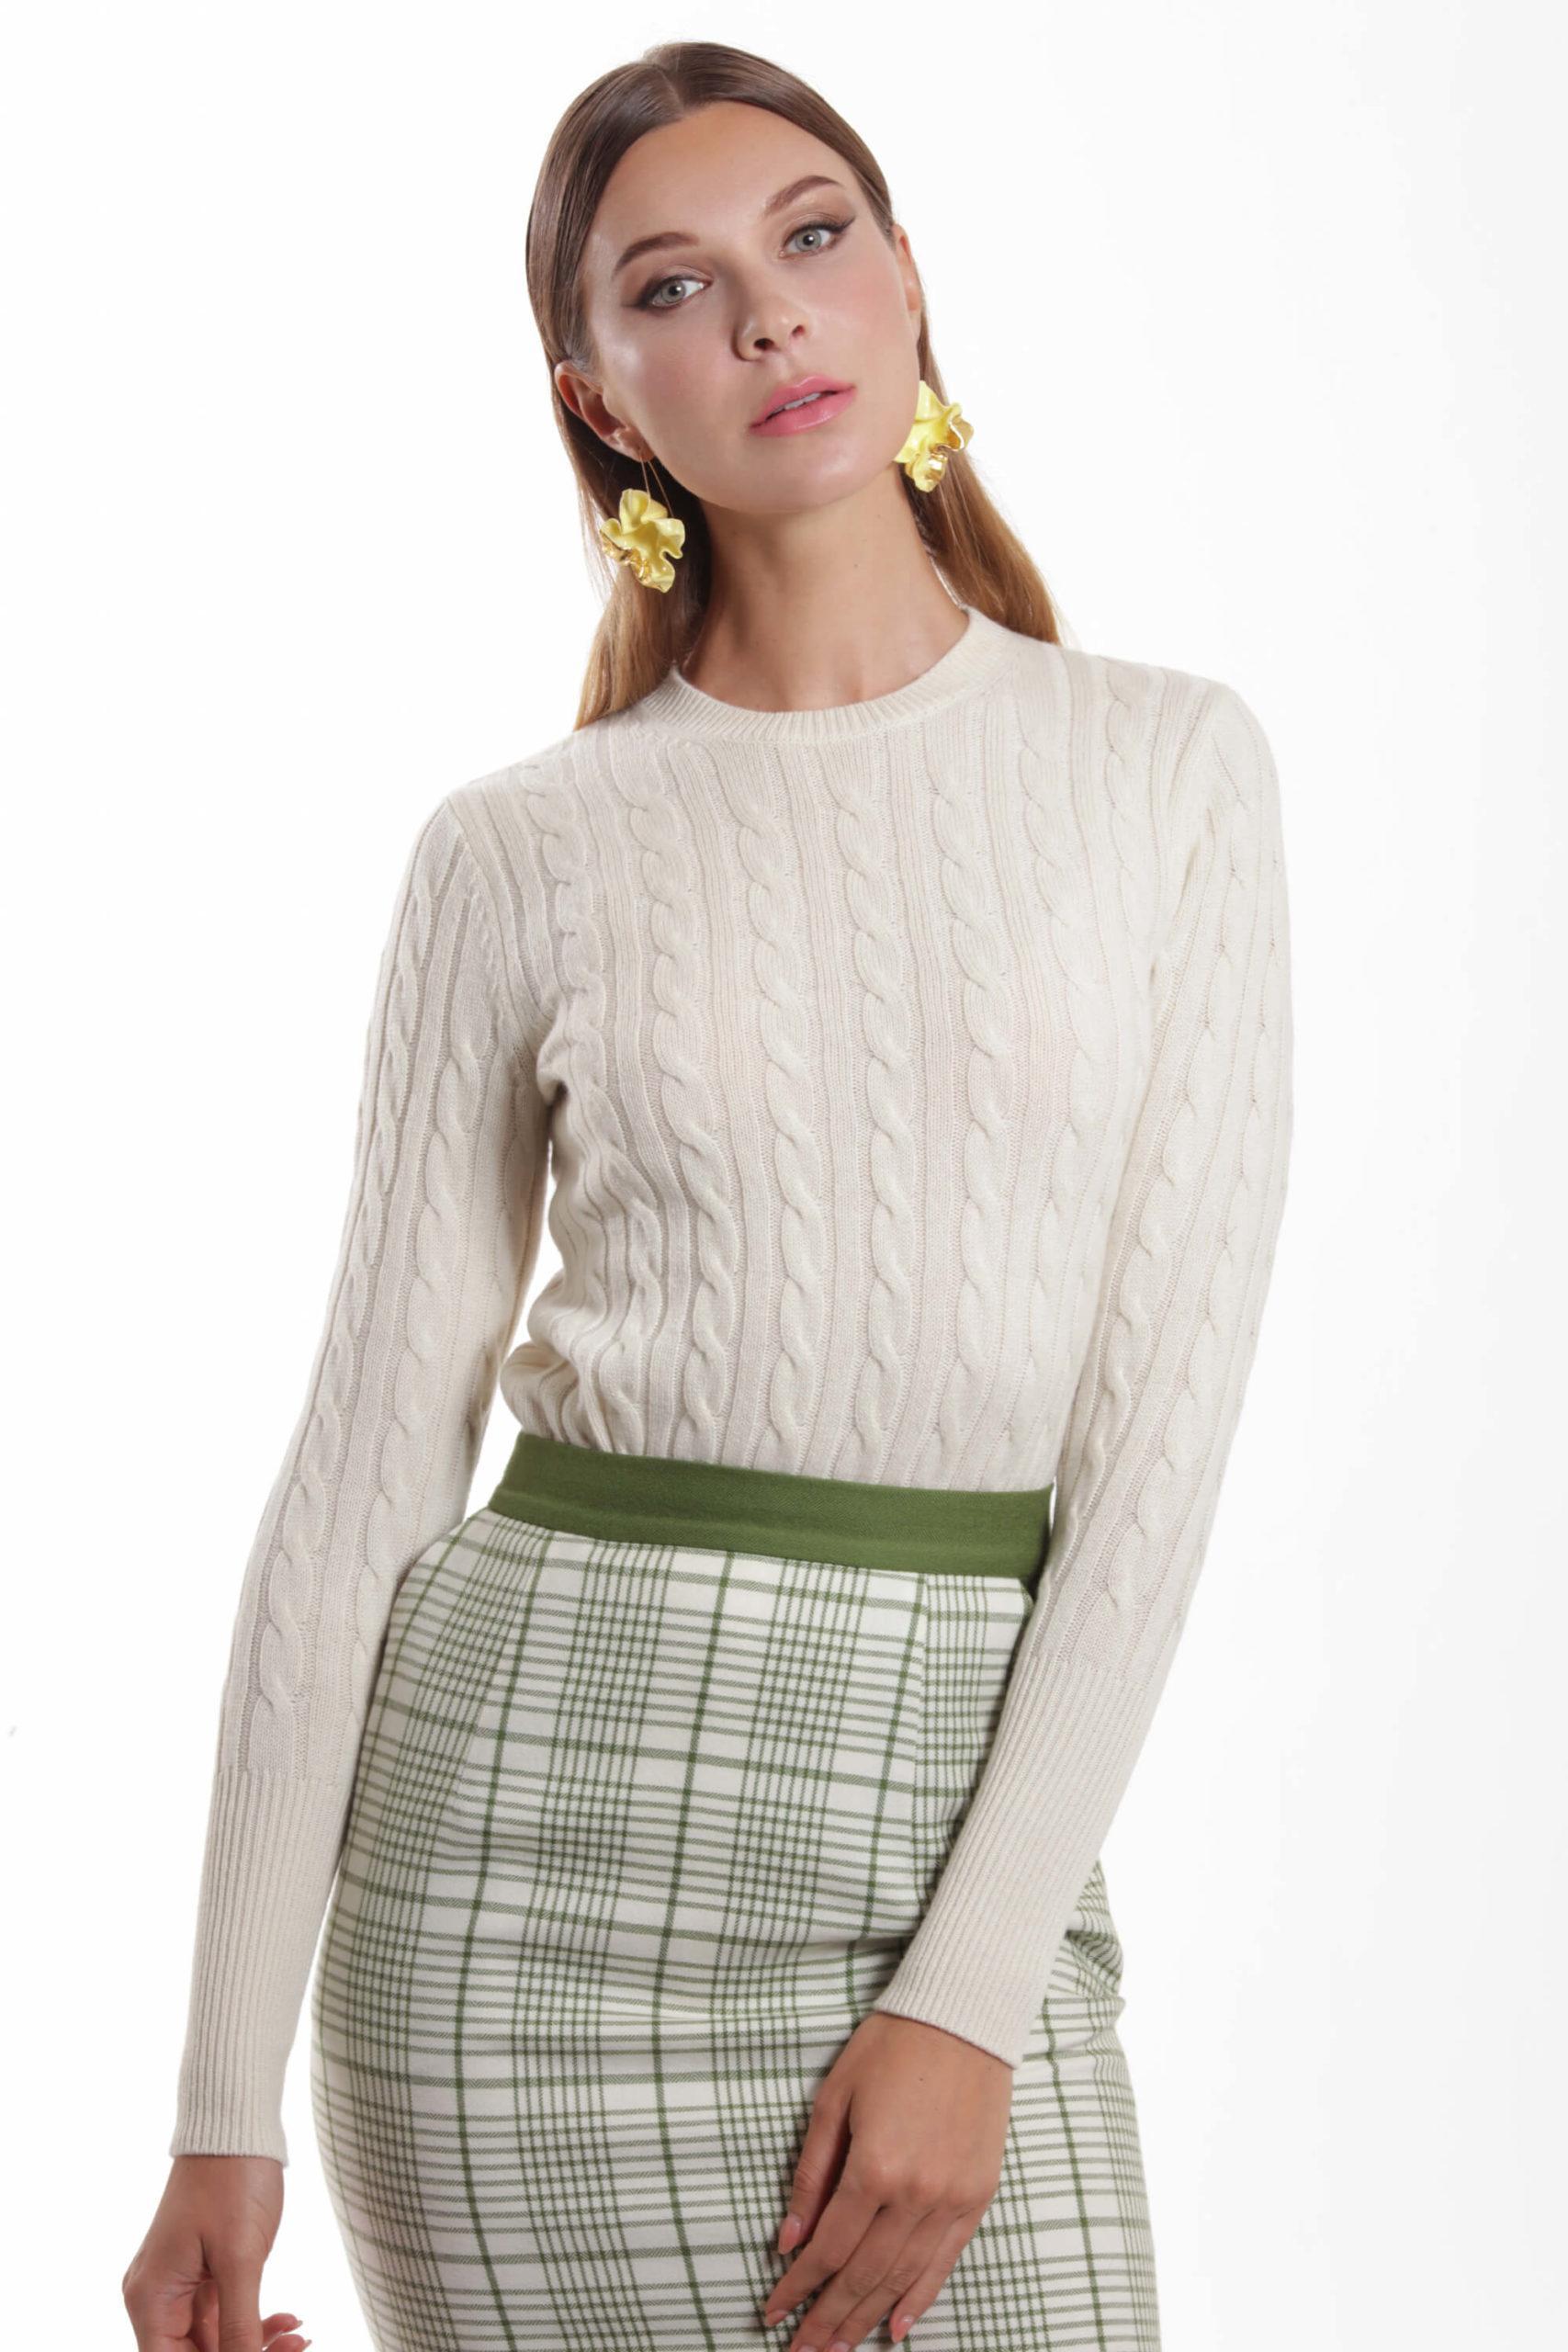 Strasbourg – Cable knit cashmere sweater in white0